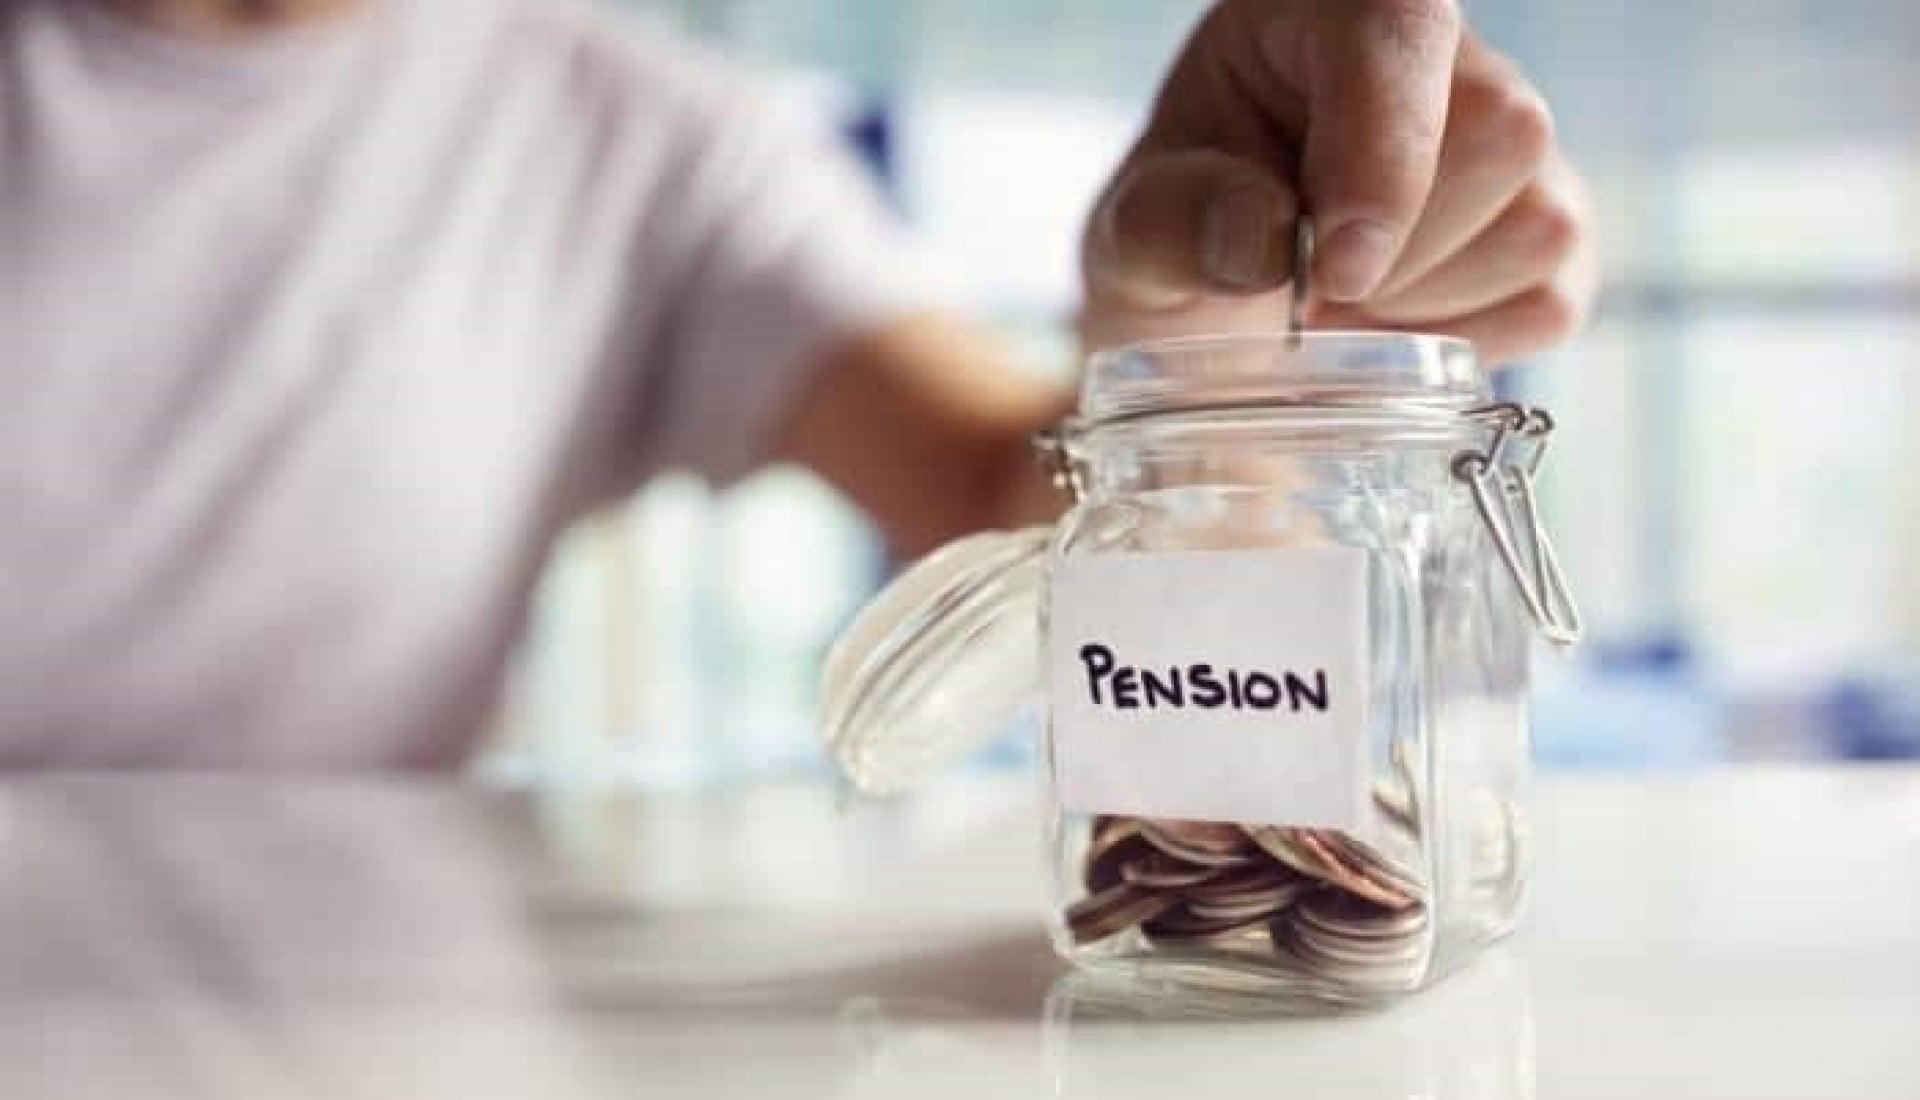 Which is the best Pension?